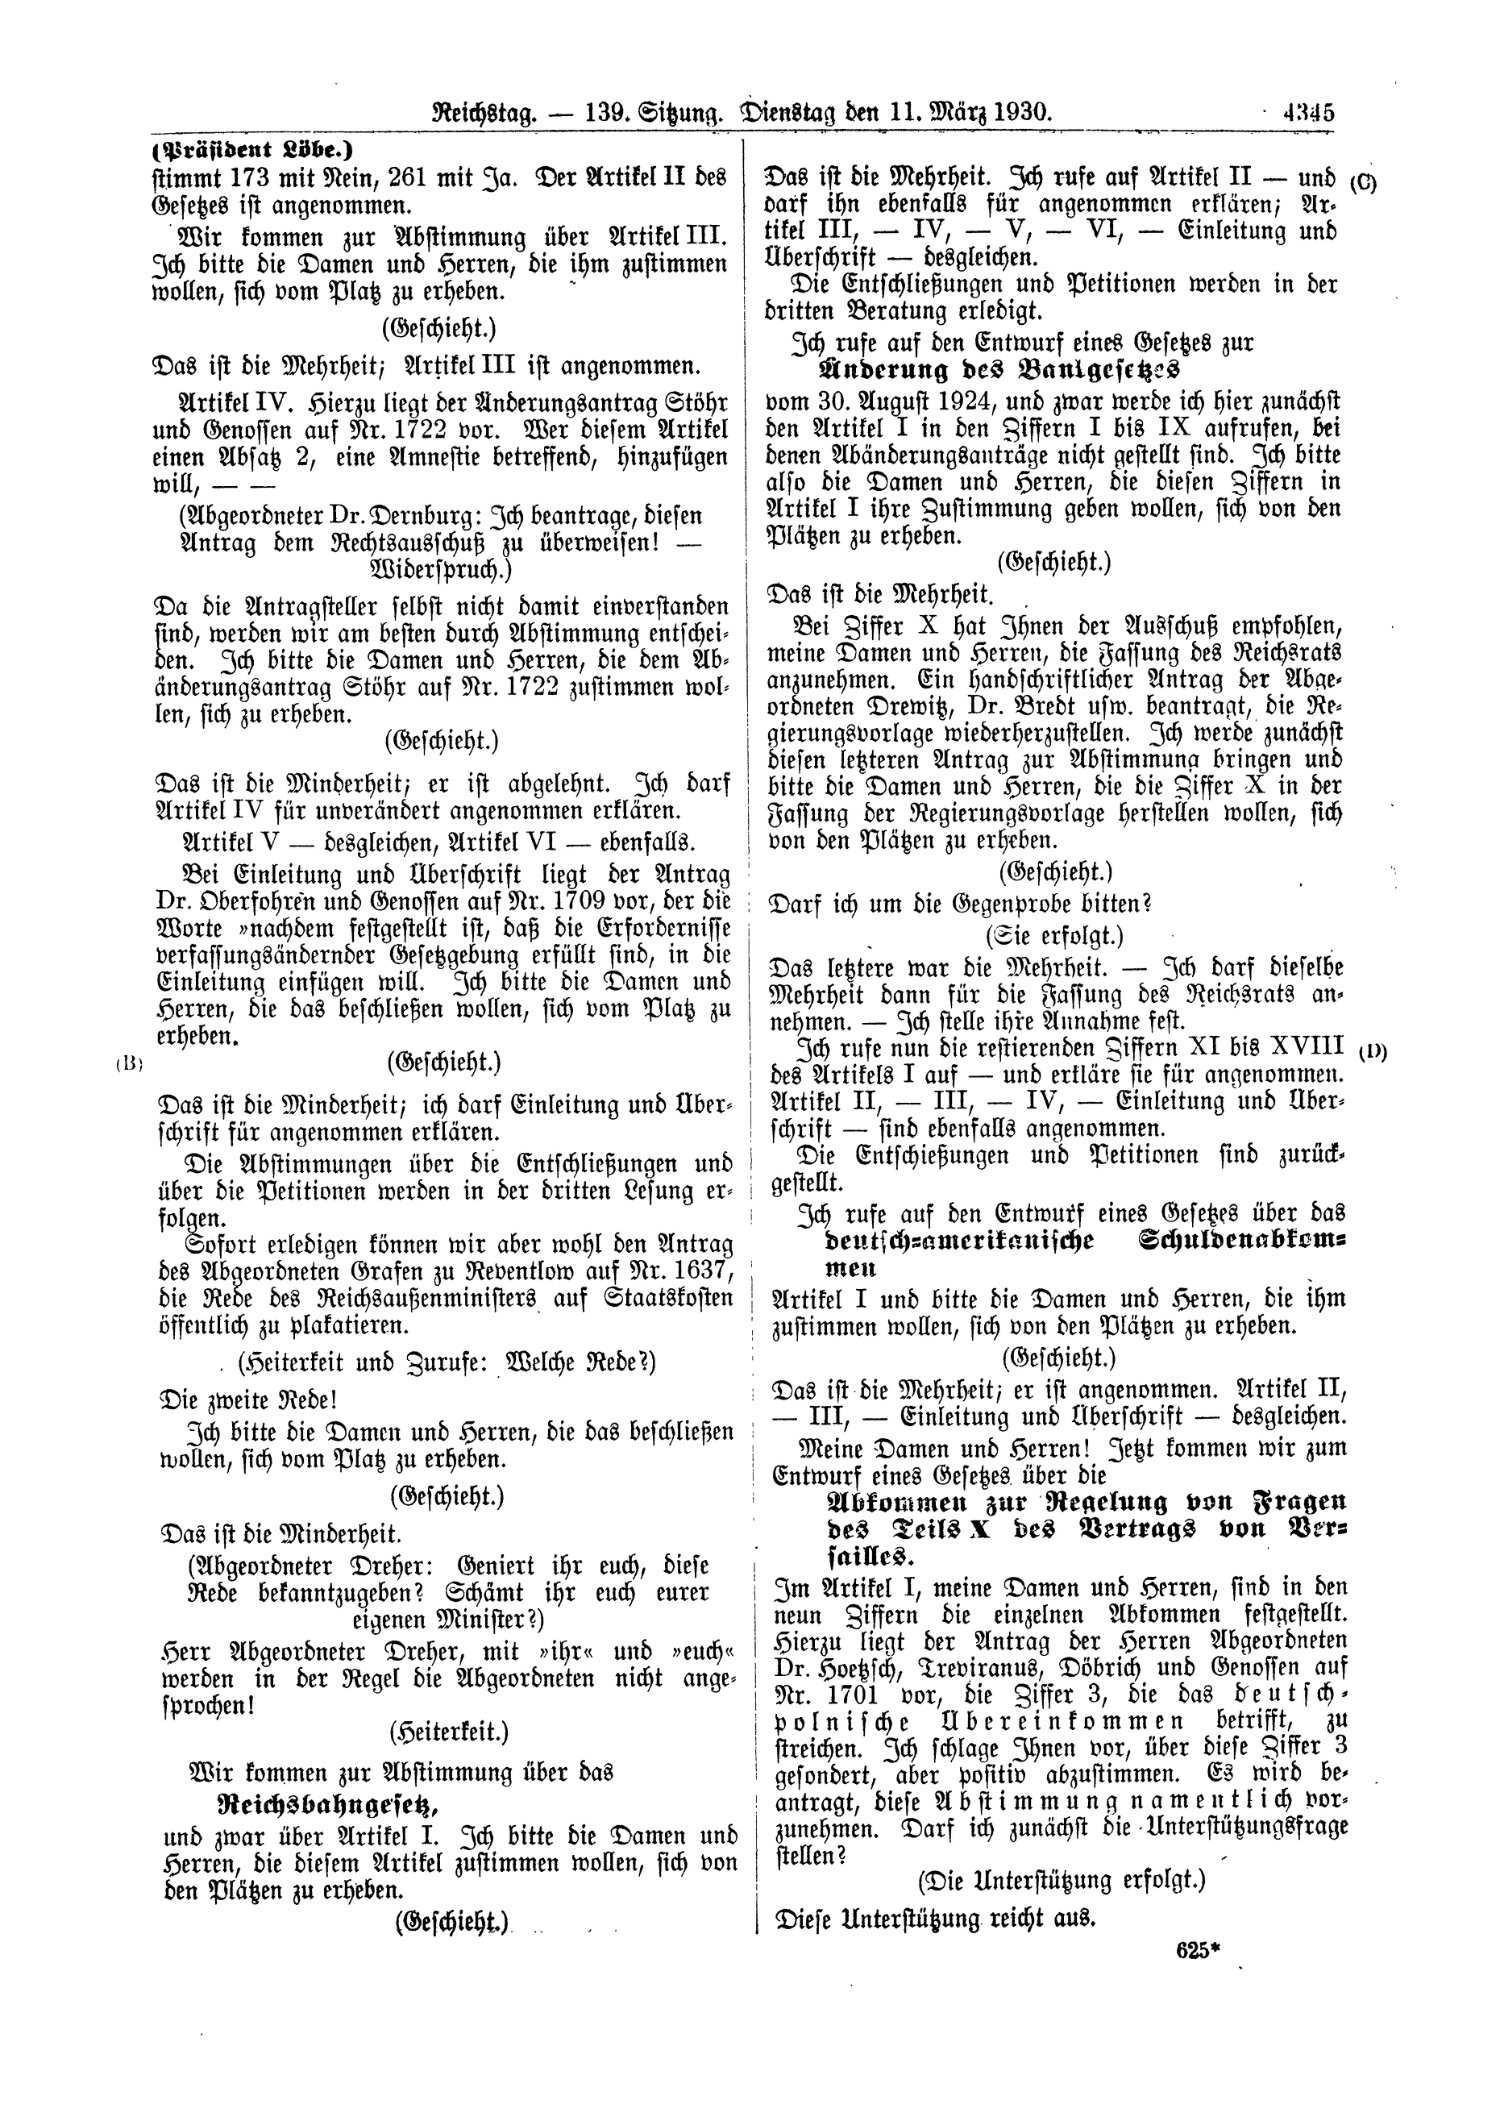 Scan of page 4345